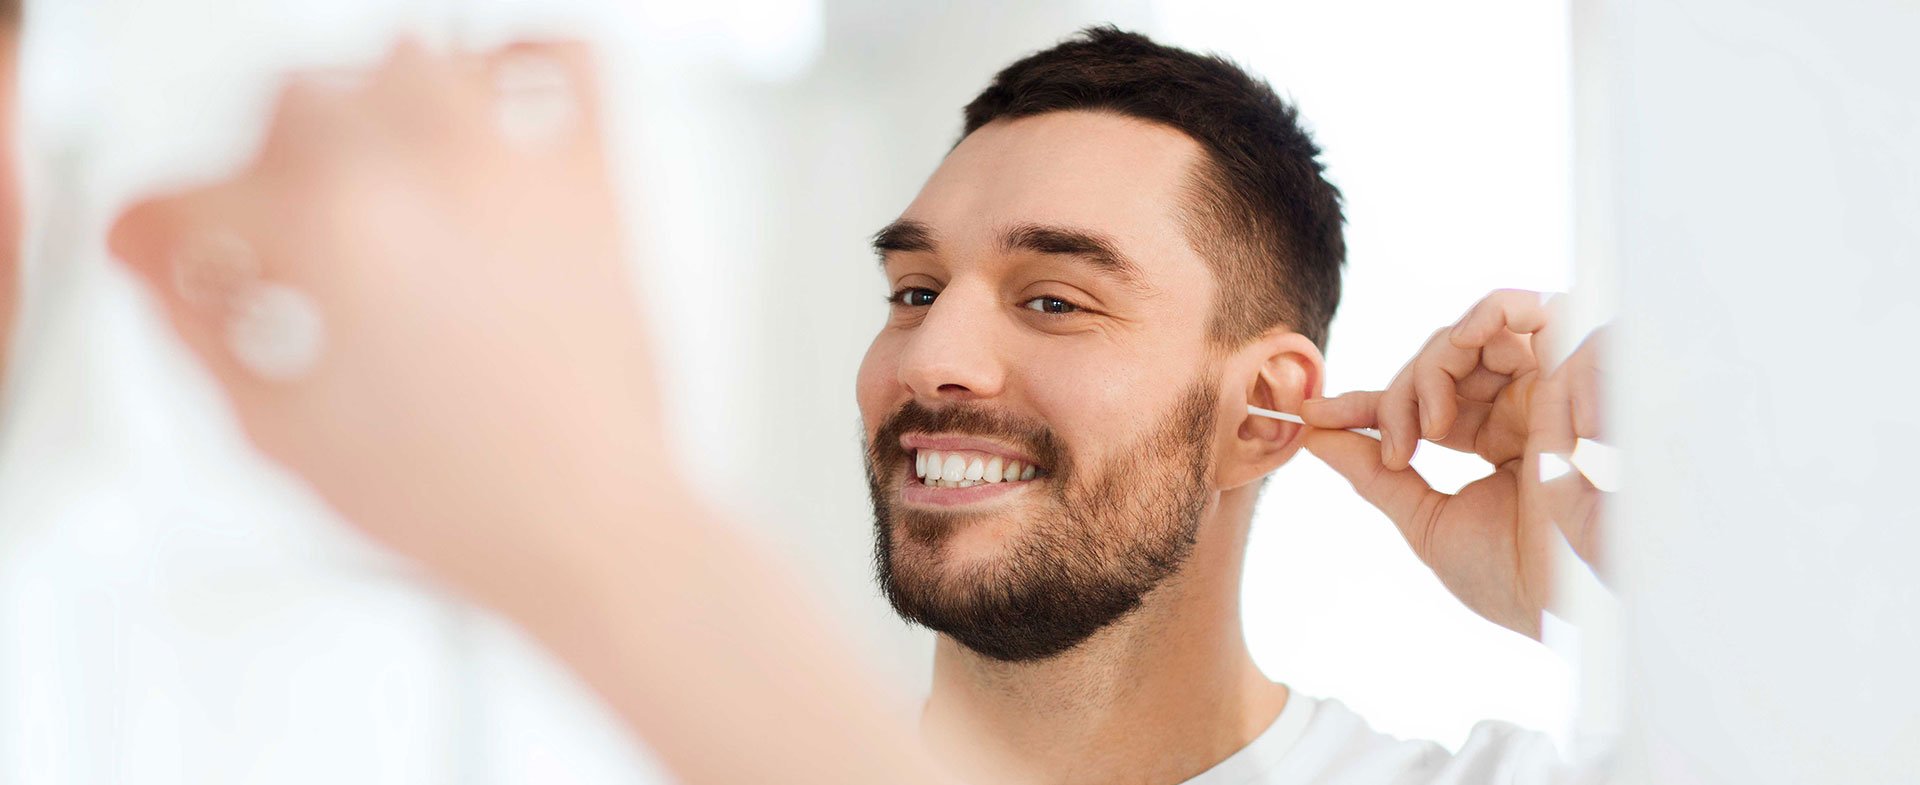 Are You Cleaning Your Ears Correctly?